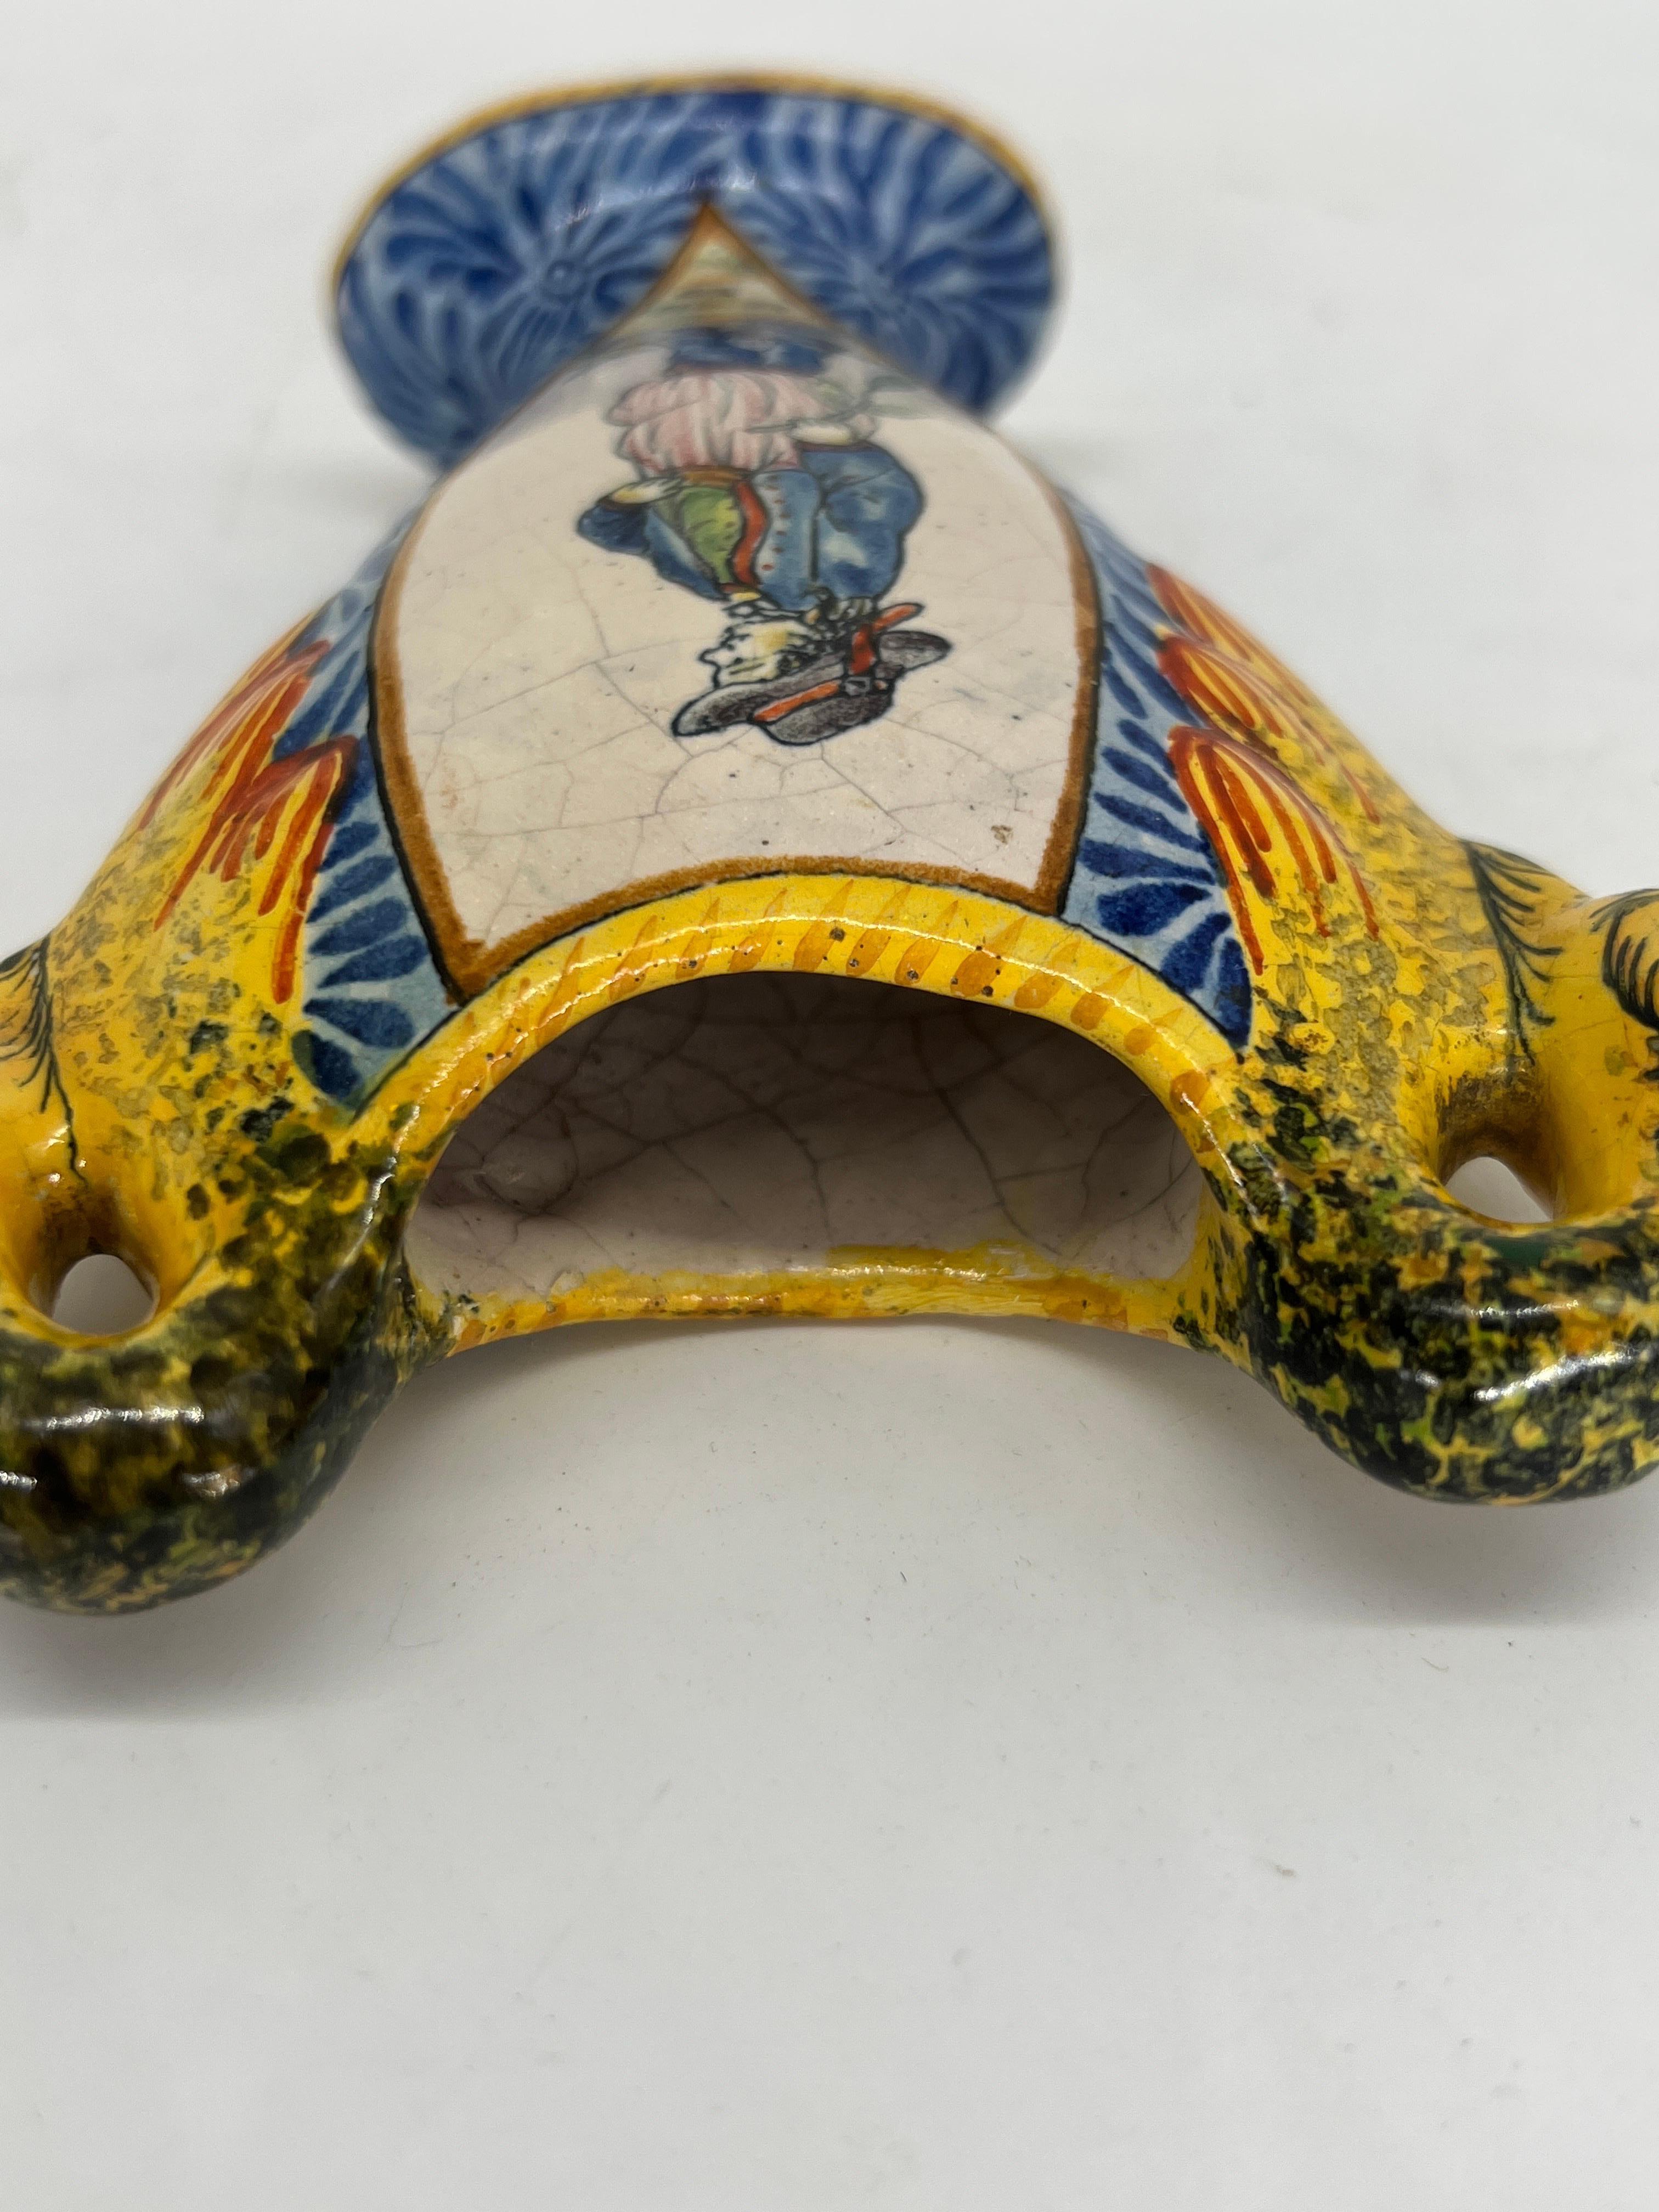 19th Century French Hand Painted Faience Porquier-Beau Quimper Swan Vase In Good Condition For Sale In Atlanta, GA